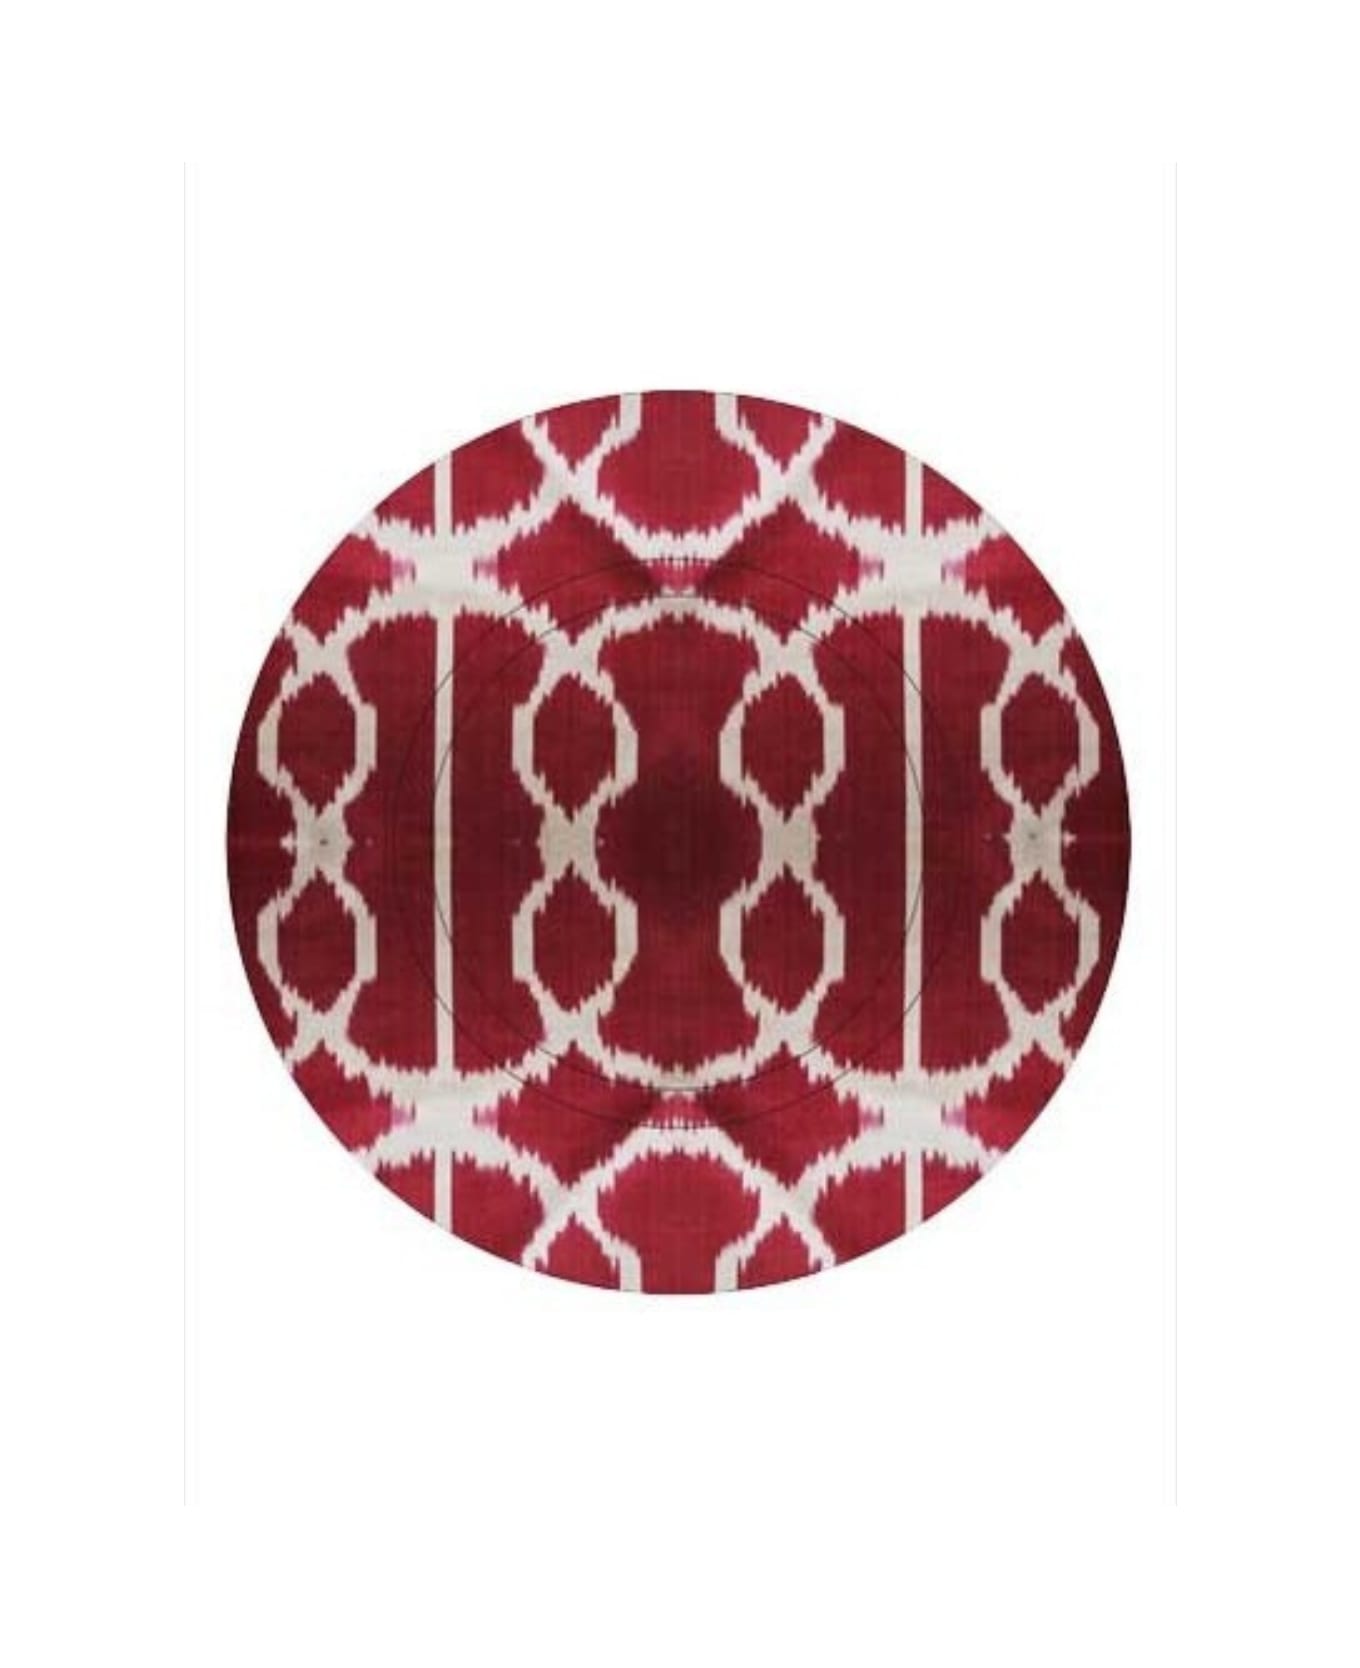 Les-Ottomans Small Red Glazed Ceramic Dinner Plate Les-ottomans Home - Red